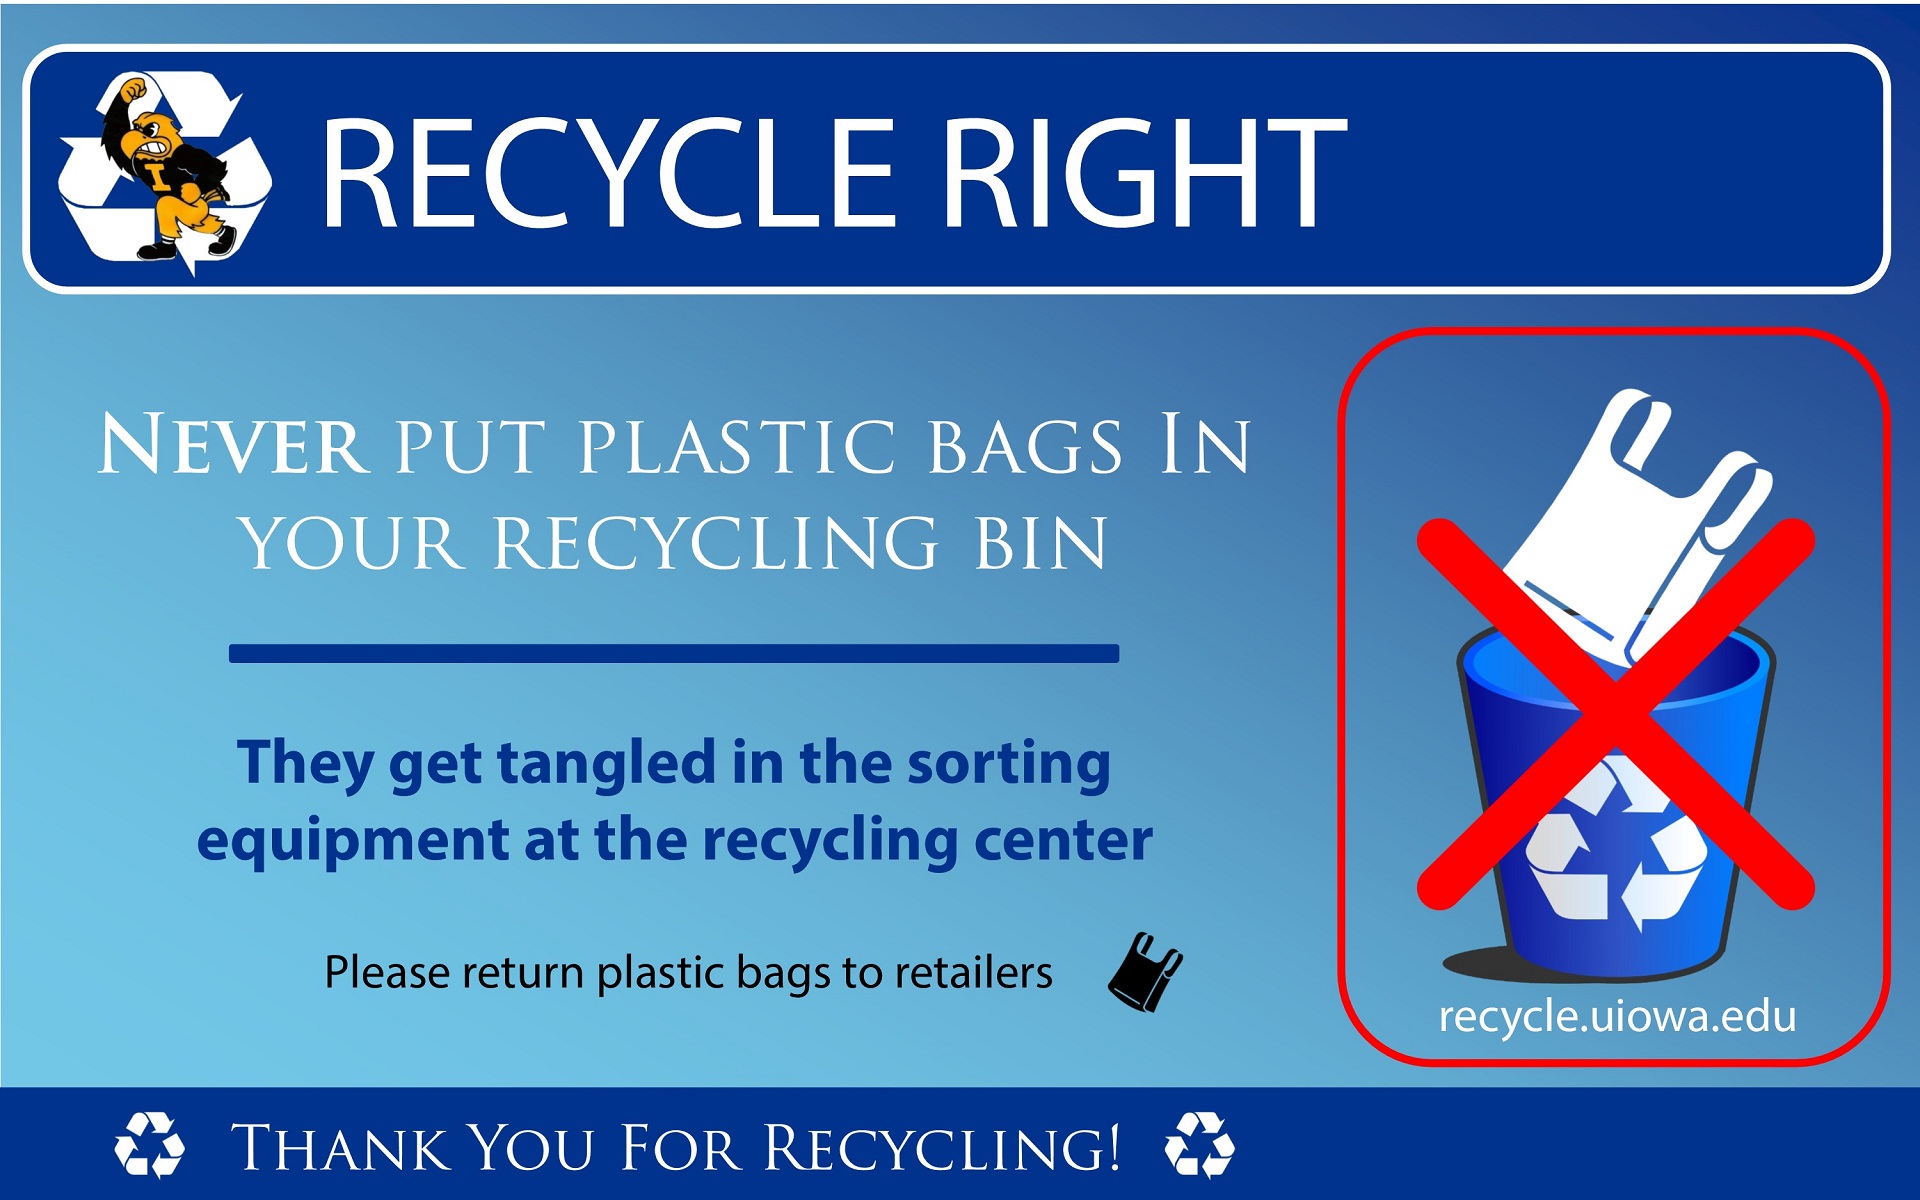 Recycle Right - Neven put plastic bags in recycle bins - Return bags to retailer.